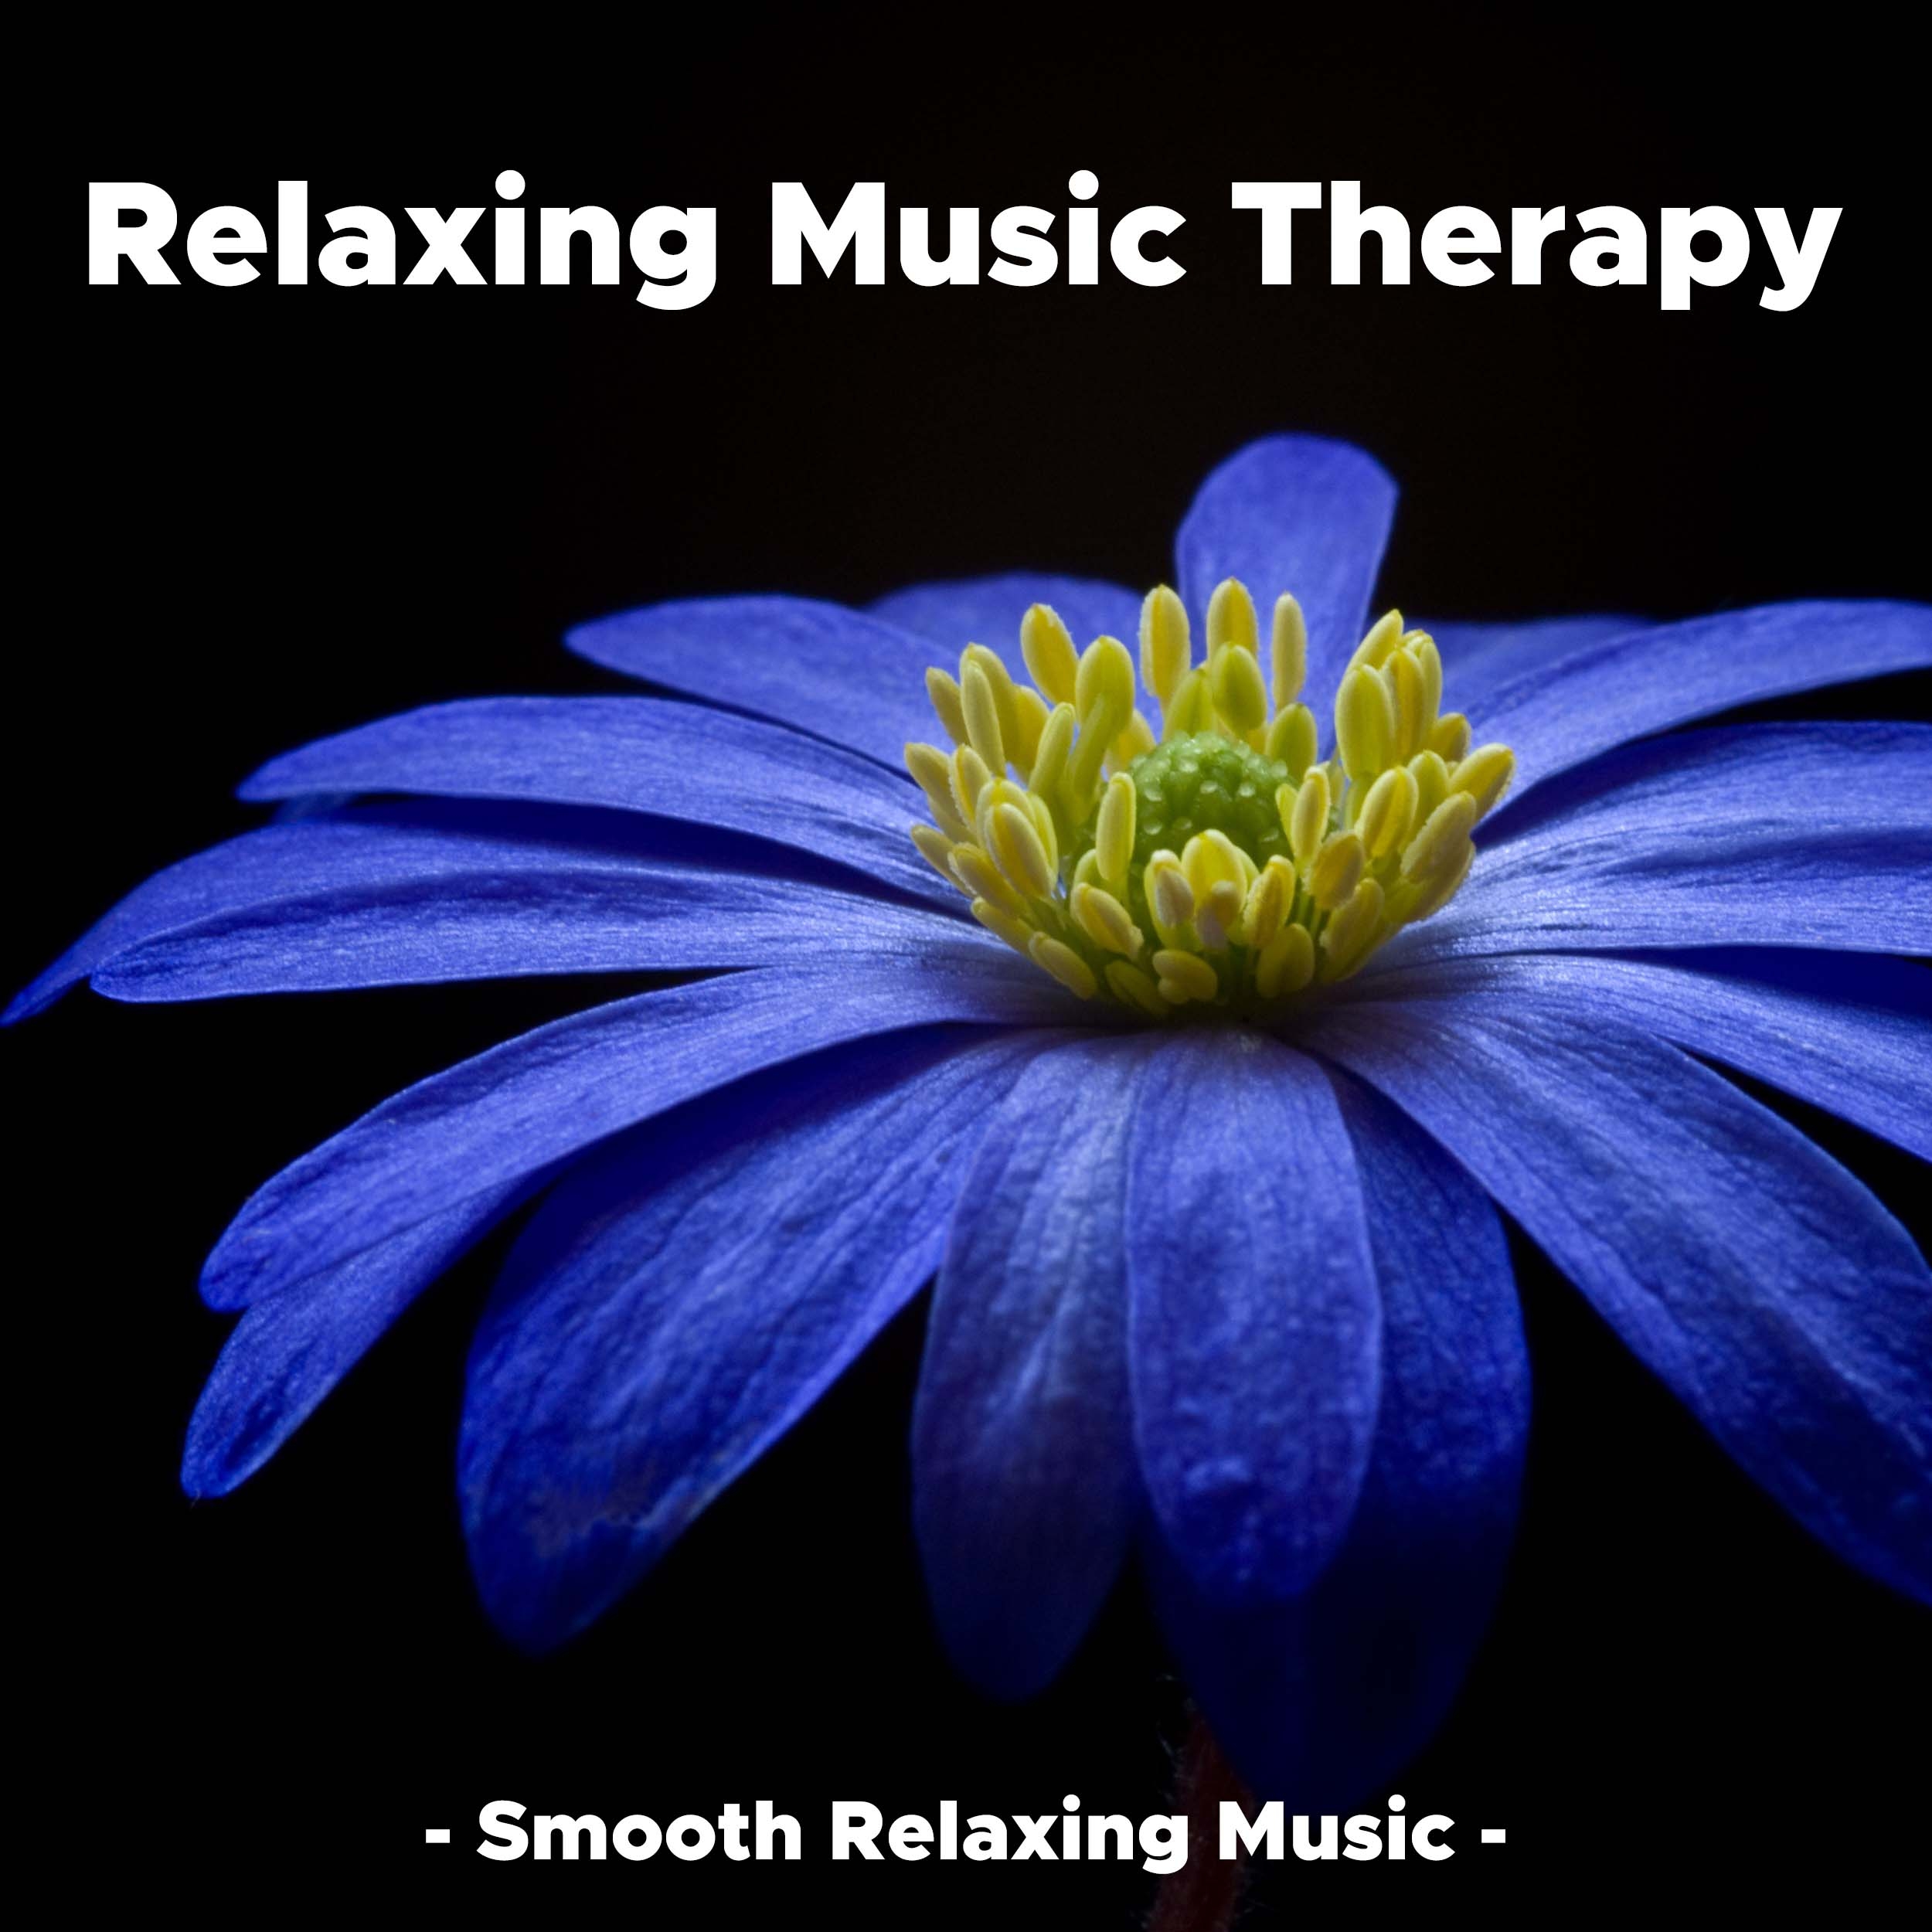 Relaxing Music Therapy - Smooth Relaxing Music